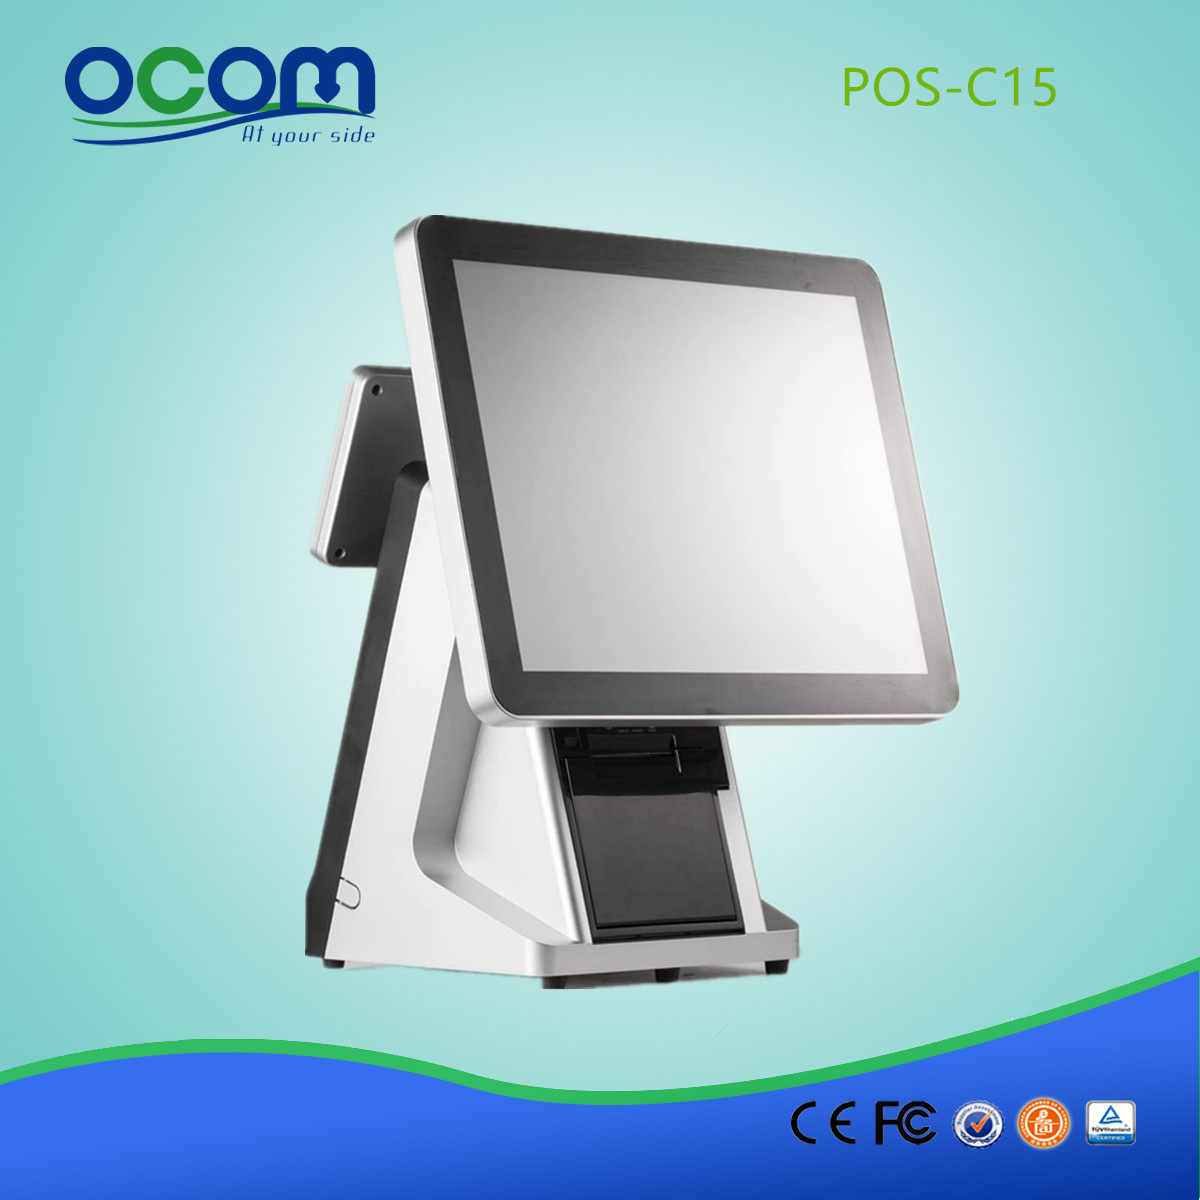 POS-C15-China wholesale hot selling  J1900 32G SSD all in one lottery pos terminal